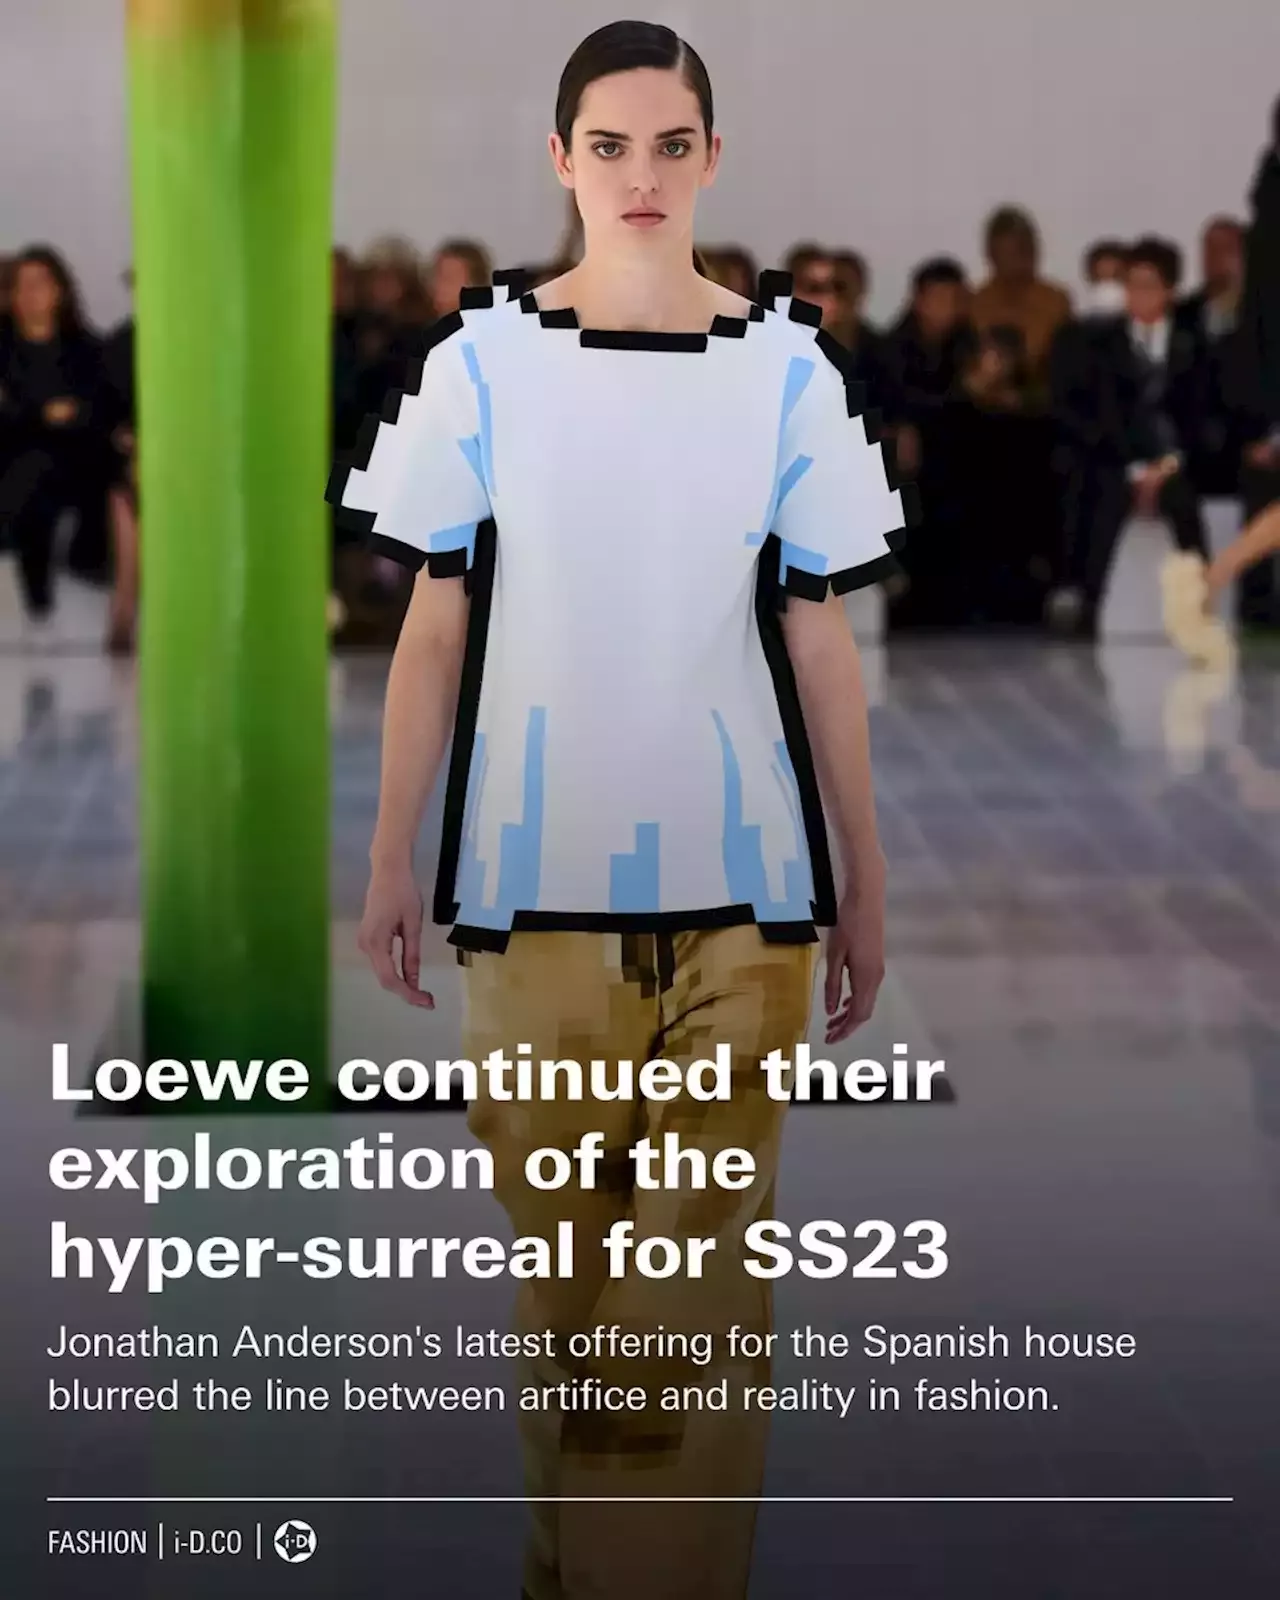 Loewe continued their exploration of the hyper-surreal for SS23